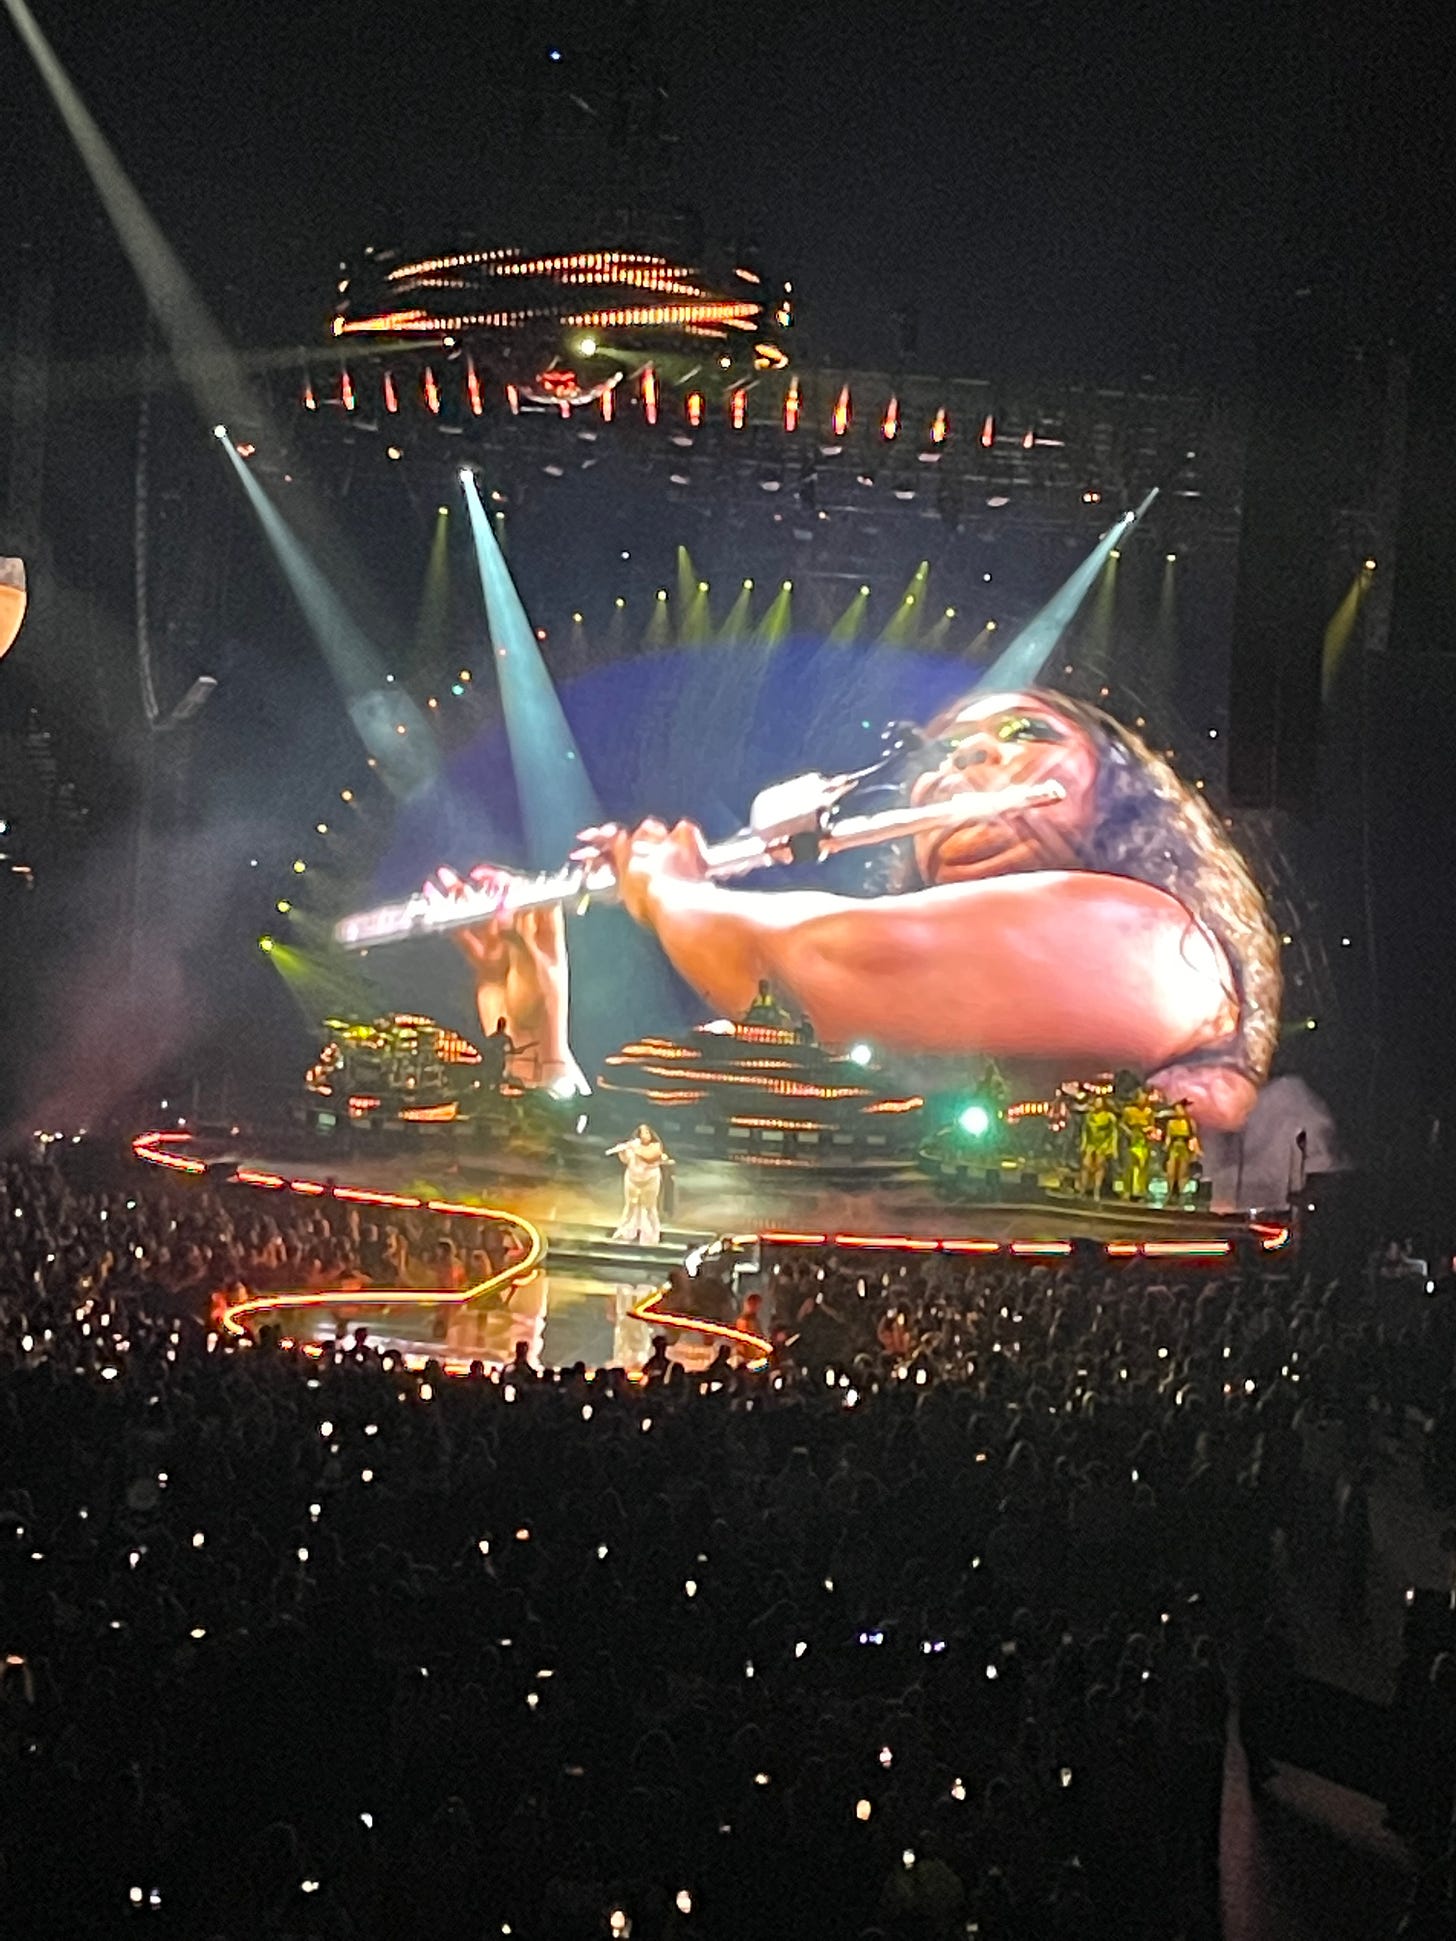 Lizzo playing flute, with image of herself projected on large screen behind stage